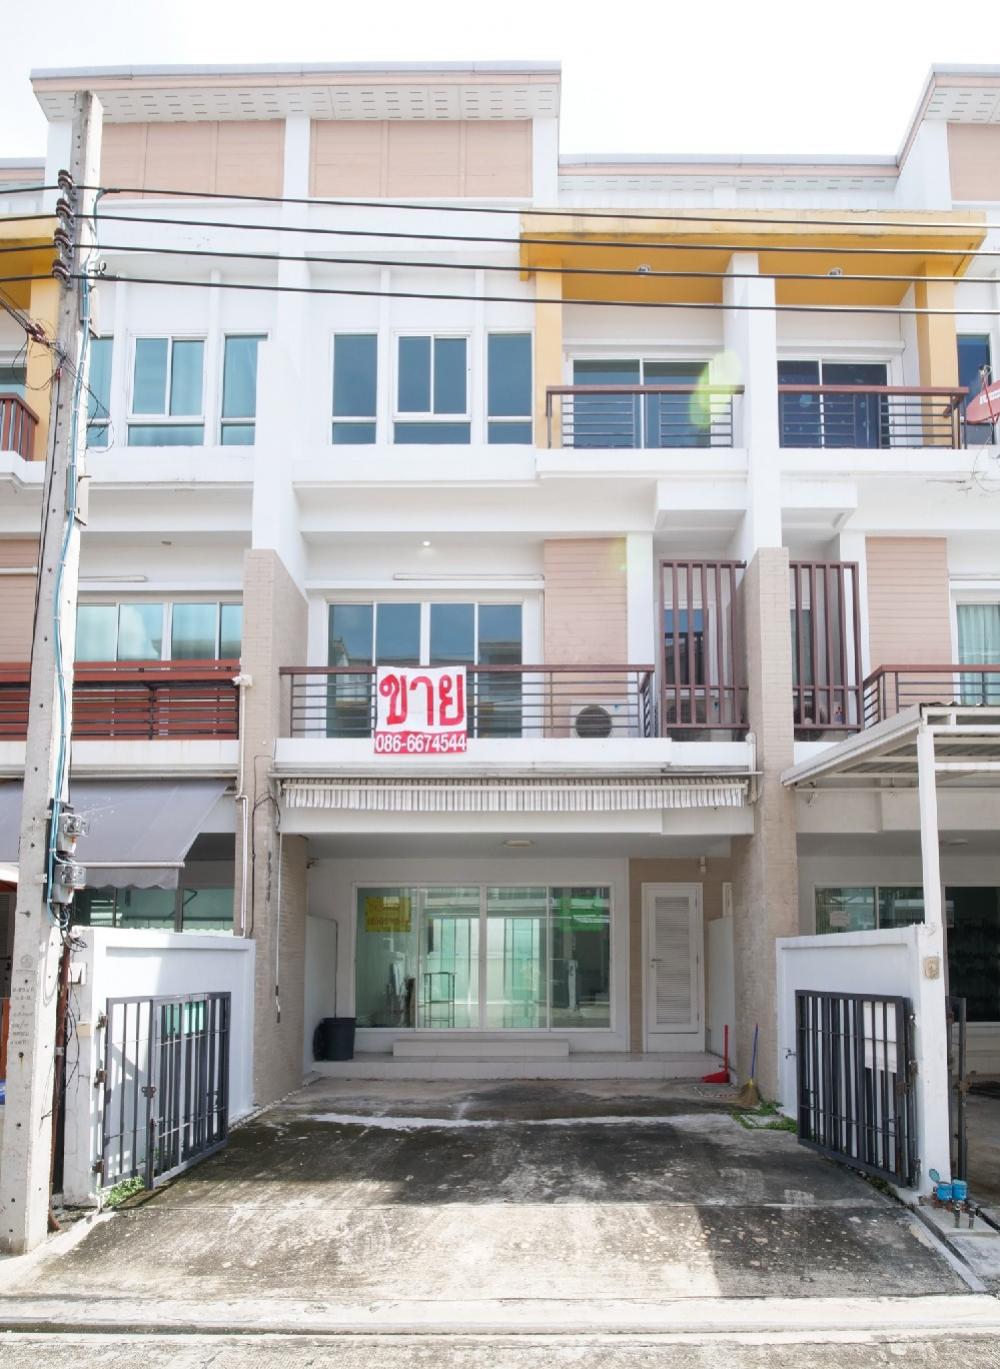 For RentTownhouseKaset Nawamin,Ladplakao : Sell or rent 3-storey townhome new building in good condition Width 5.5 m.